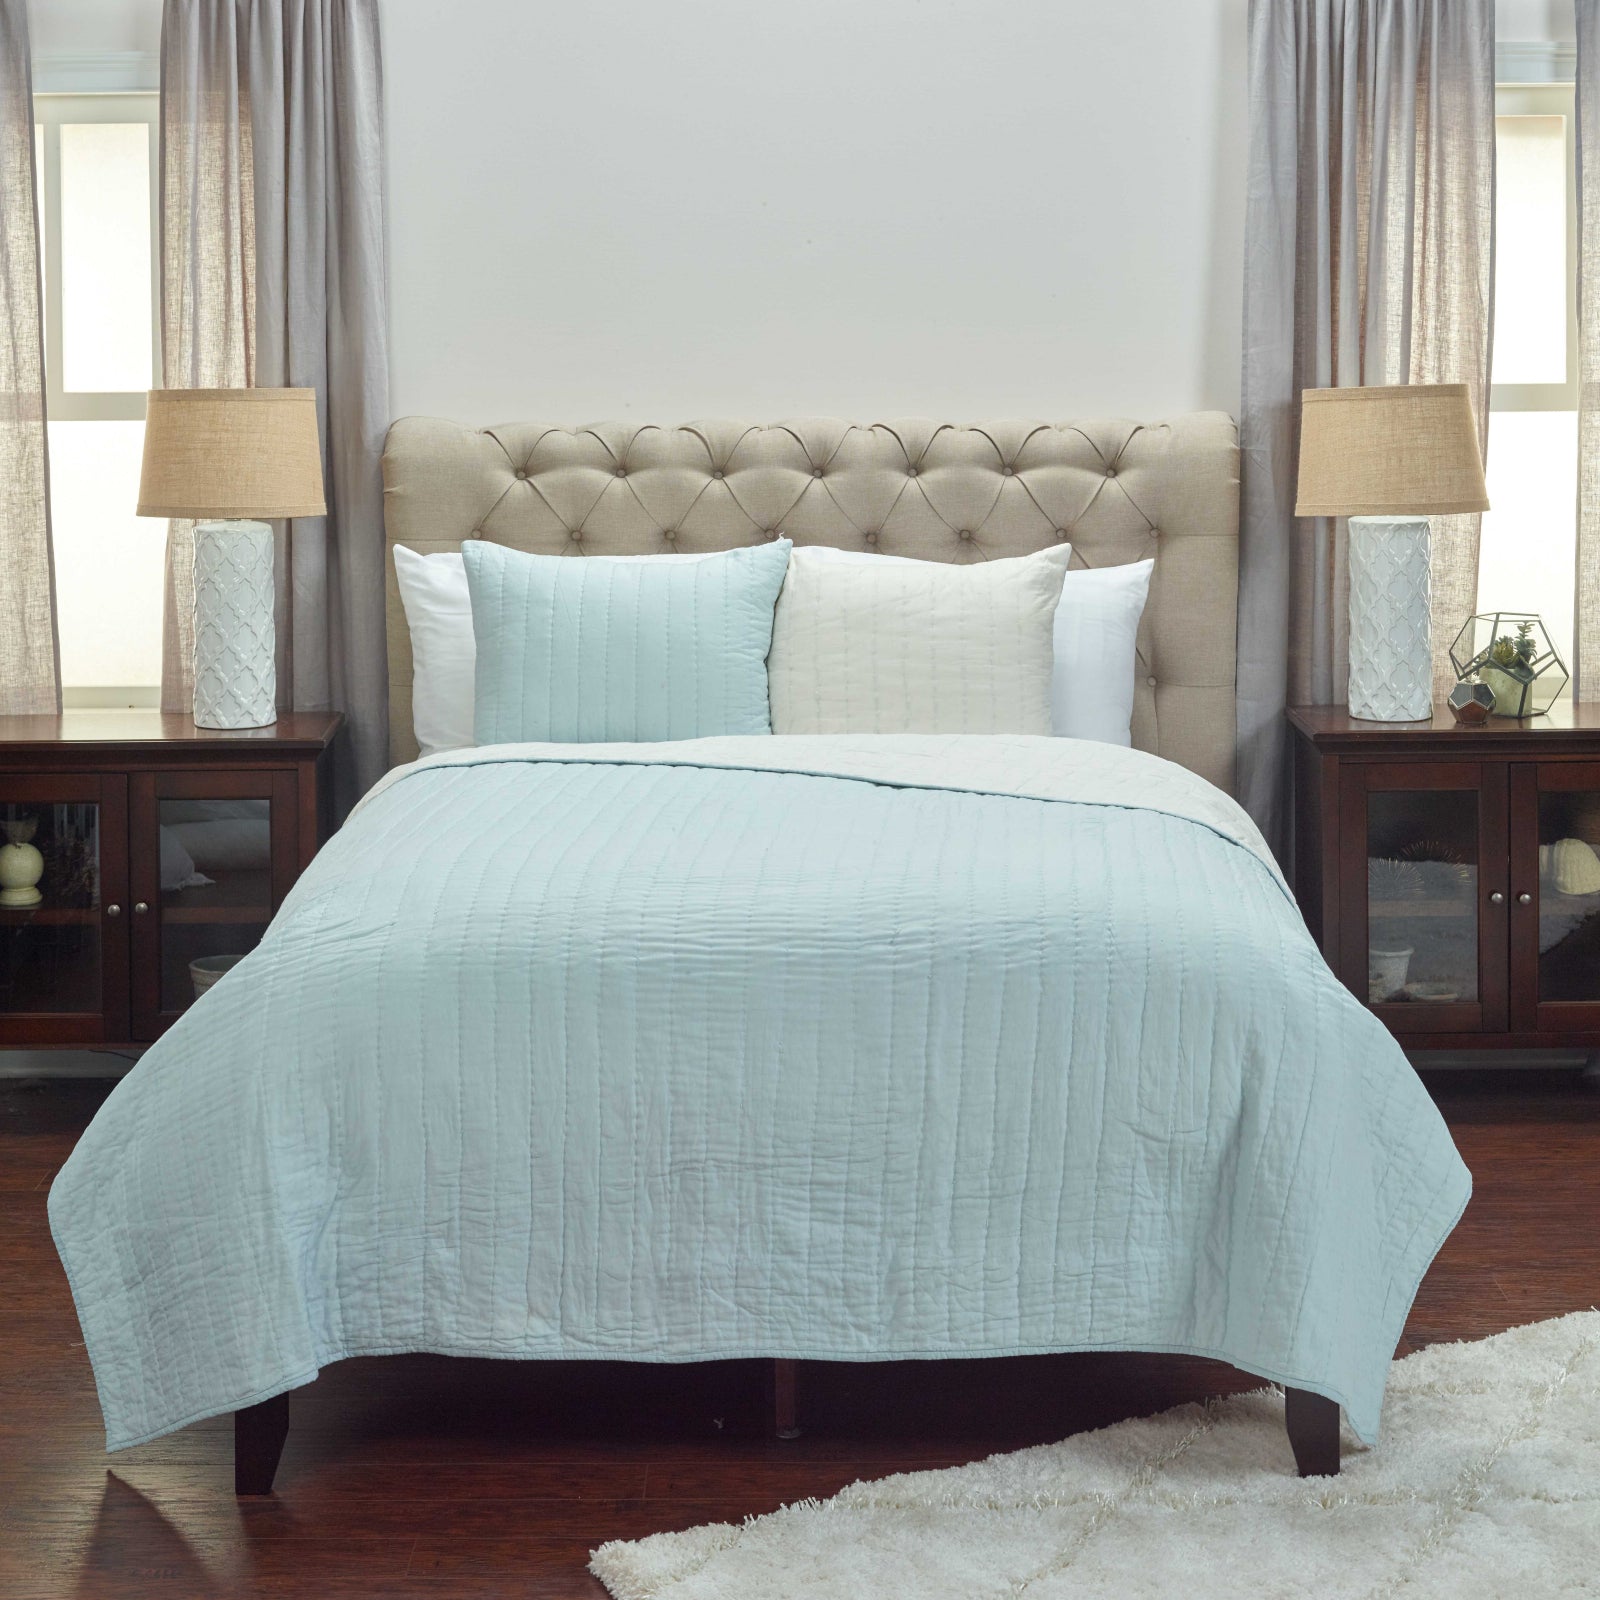 Rizzy BT1407 Gracie Blue Ivory Bedding main image